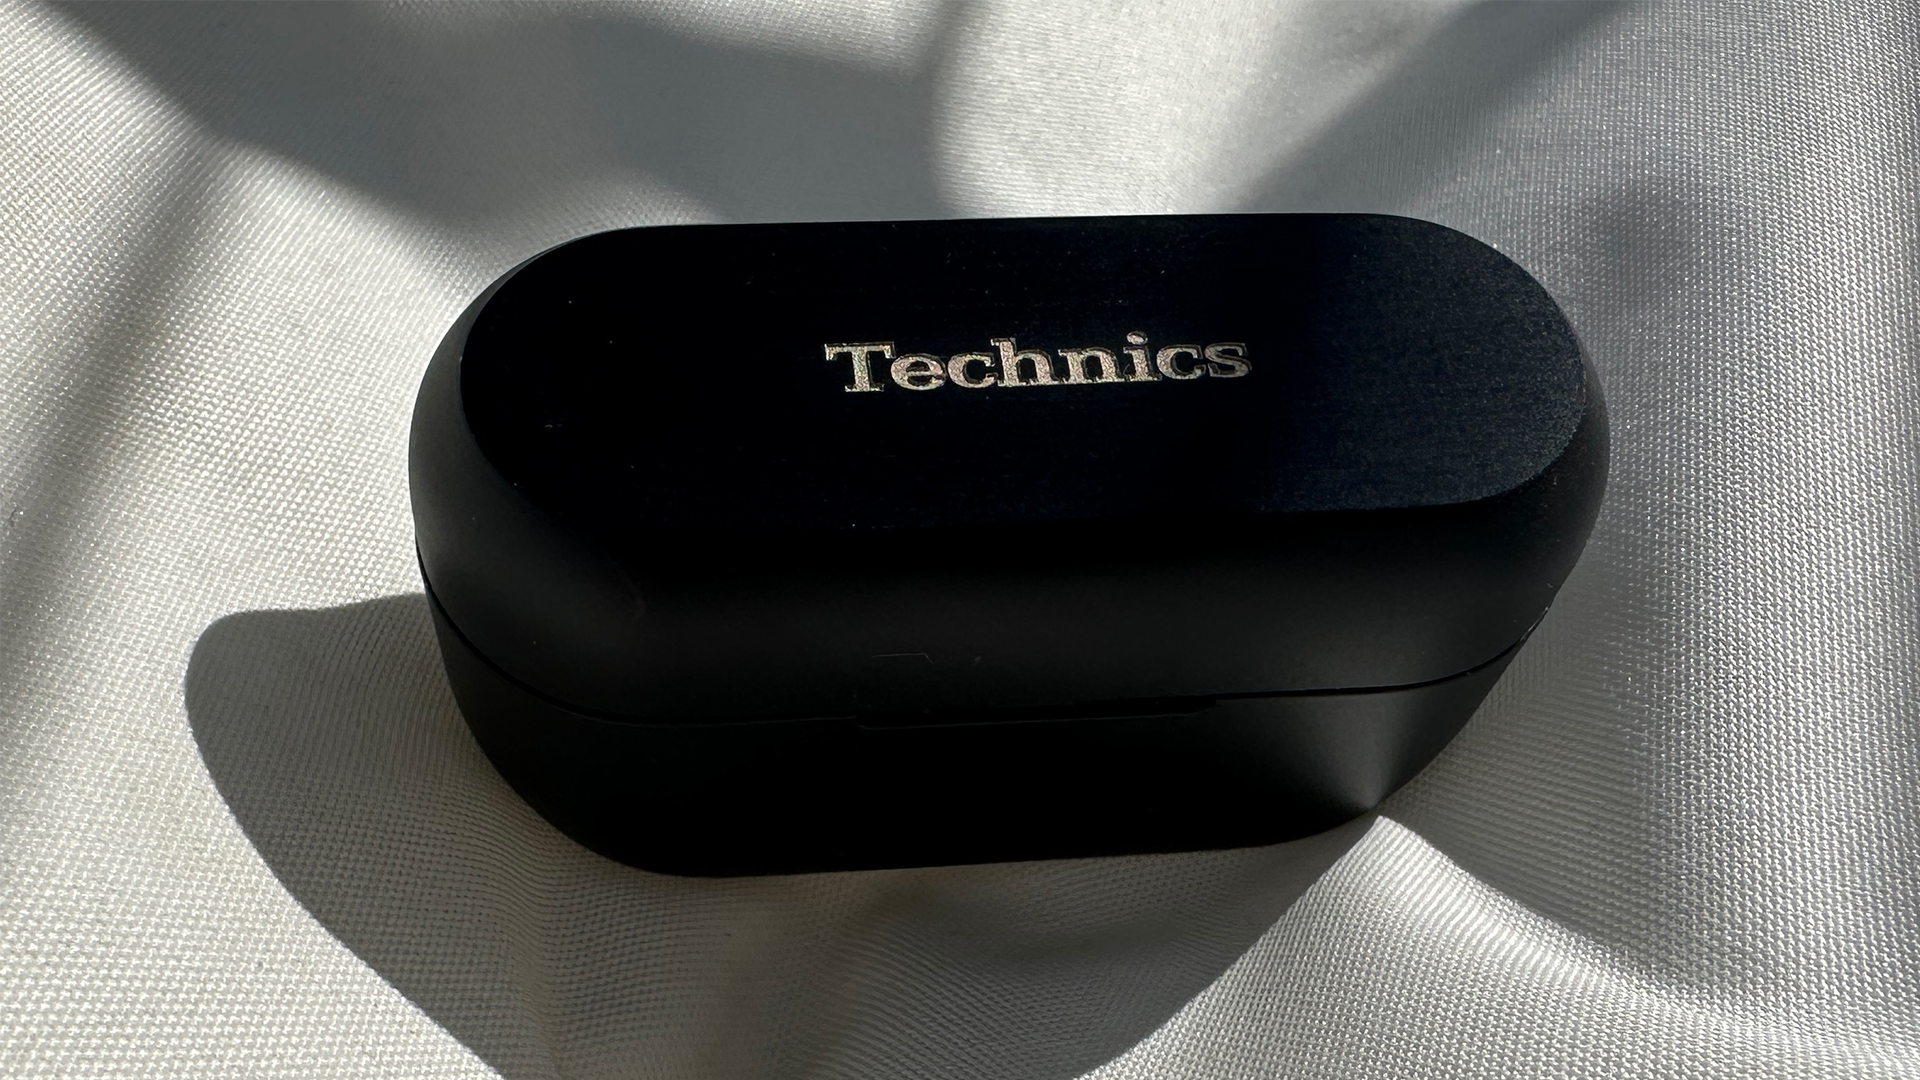 The Technics EAHAZ80 inside their case with the lid closed